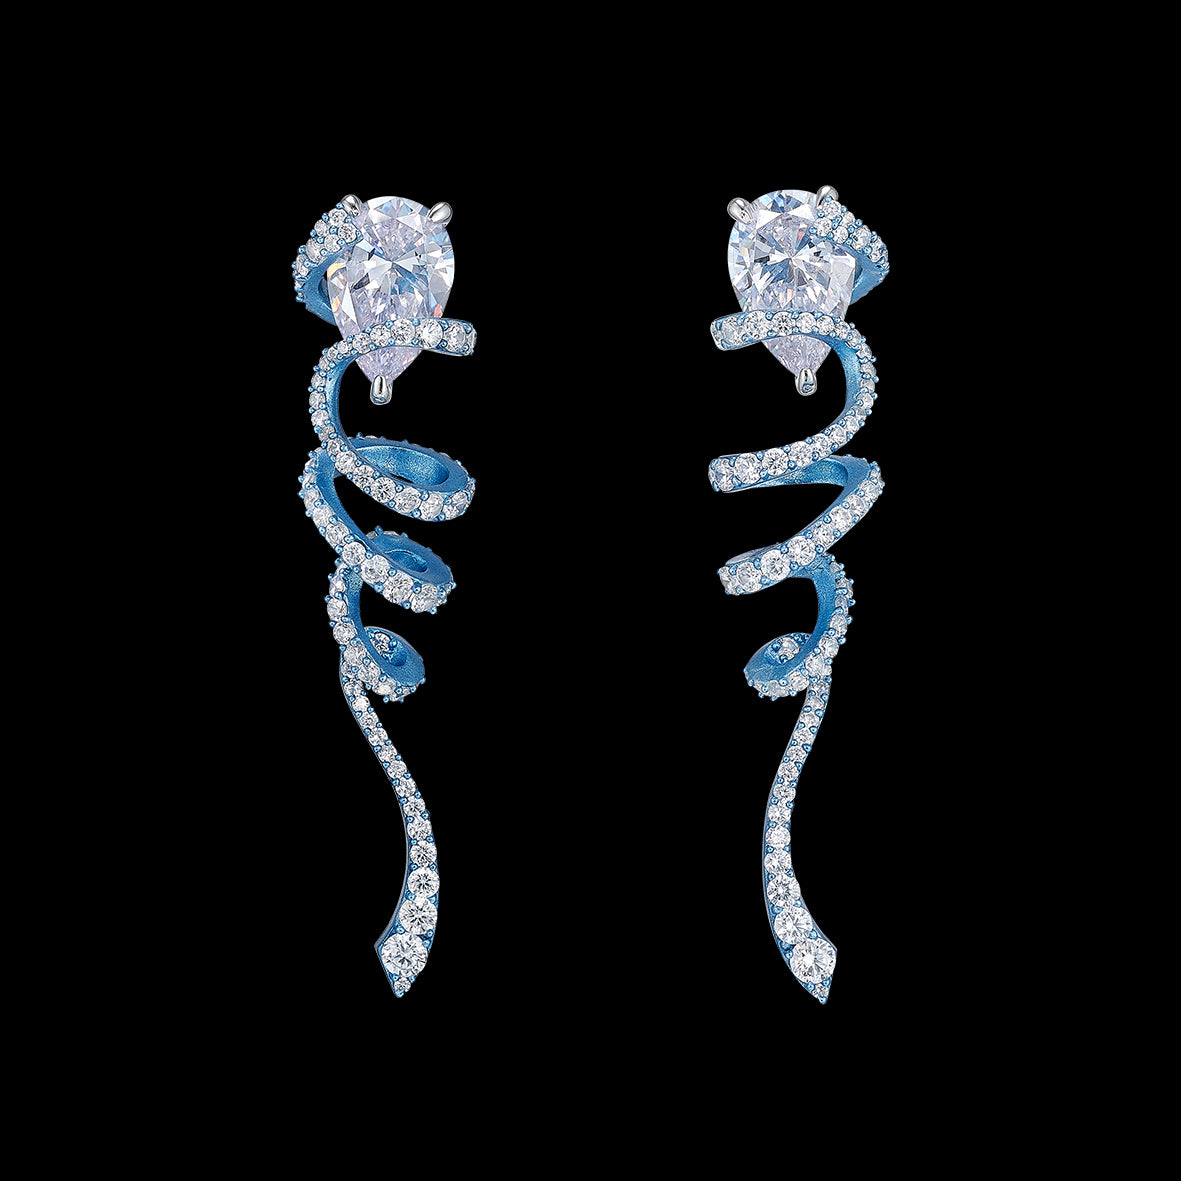 Baby Blue Ribbon Twirl Earrings, Earrings, Anabela Chan Joaillerie - Fine jewelry with laboratory grown and created gemstones hand-crafted in the United Kingdom. Anabela Chan Joaillerie is the first fine jewellery brand in the world to champion laboratory-grown and created gemstones with high jewellery design, artisanal craftsmanship and a focus on ethical and sustainable innovations.